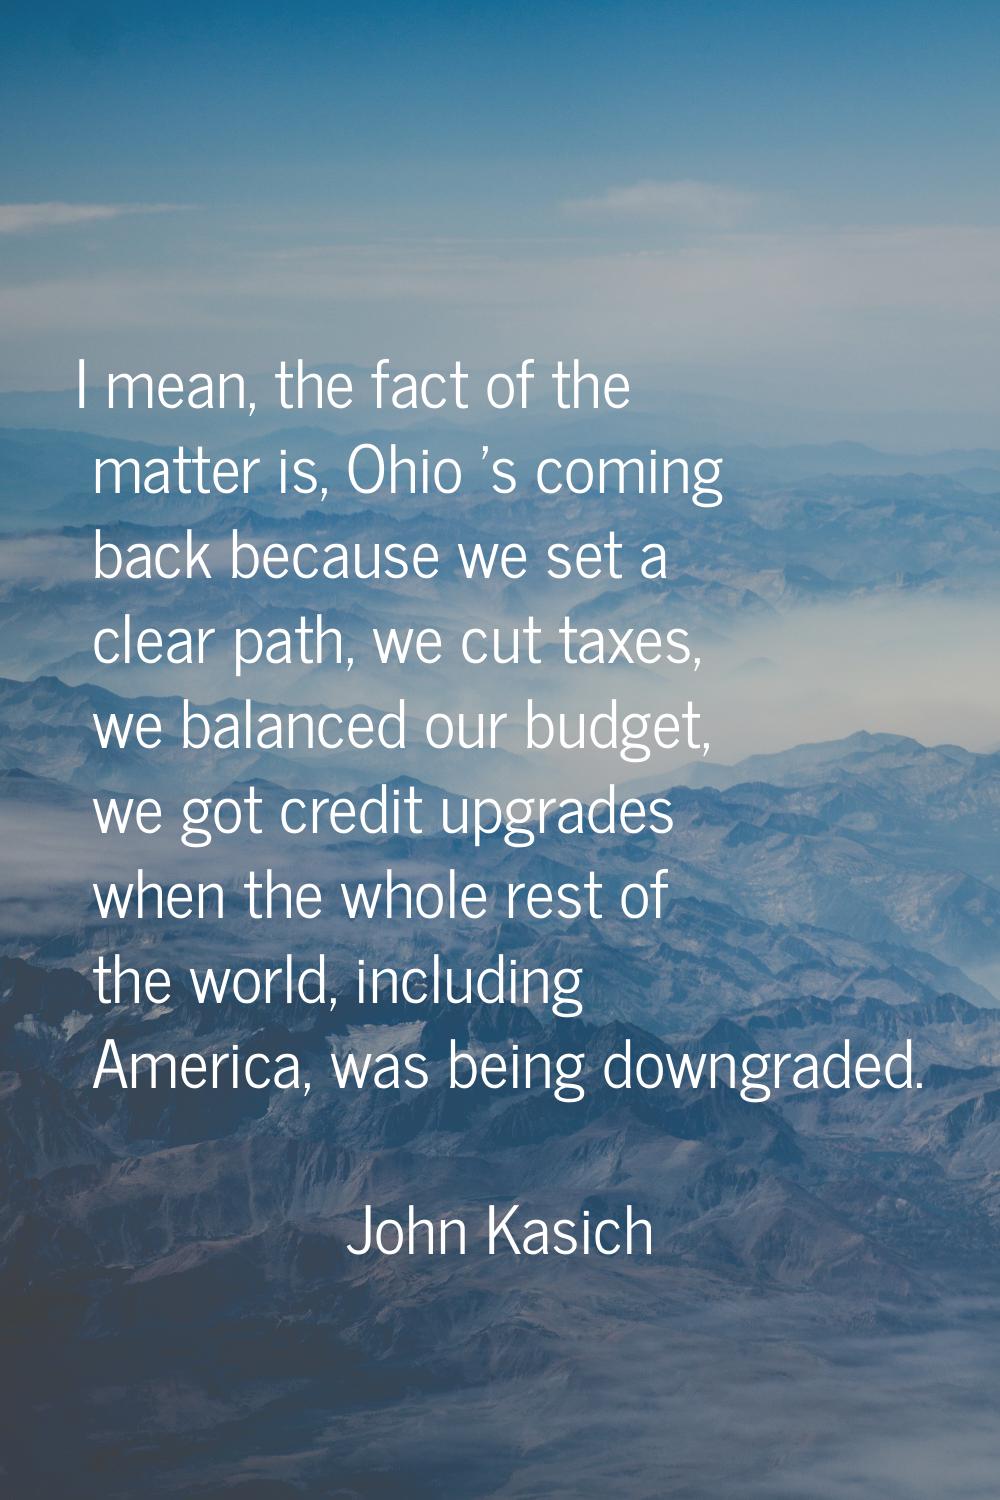 I mean, the fact of the matter is, Ohio 's coming back because we set a clear path, we cut taxes, w